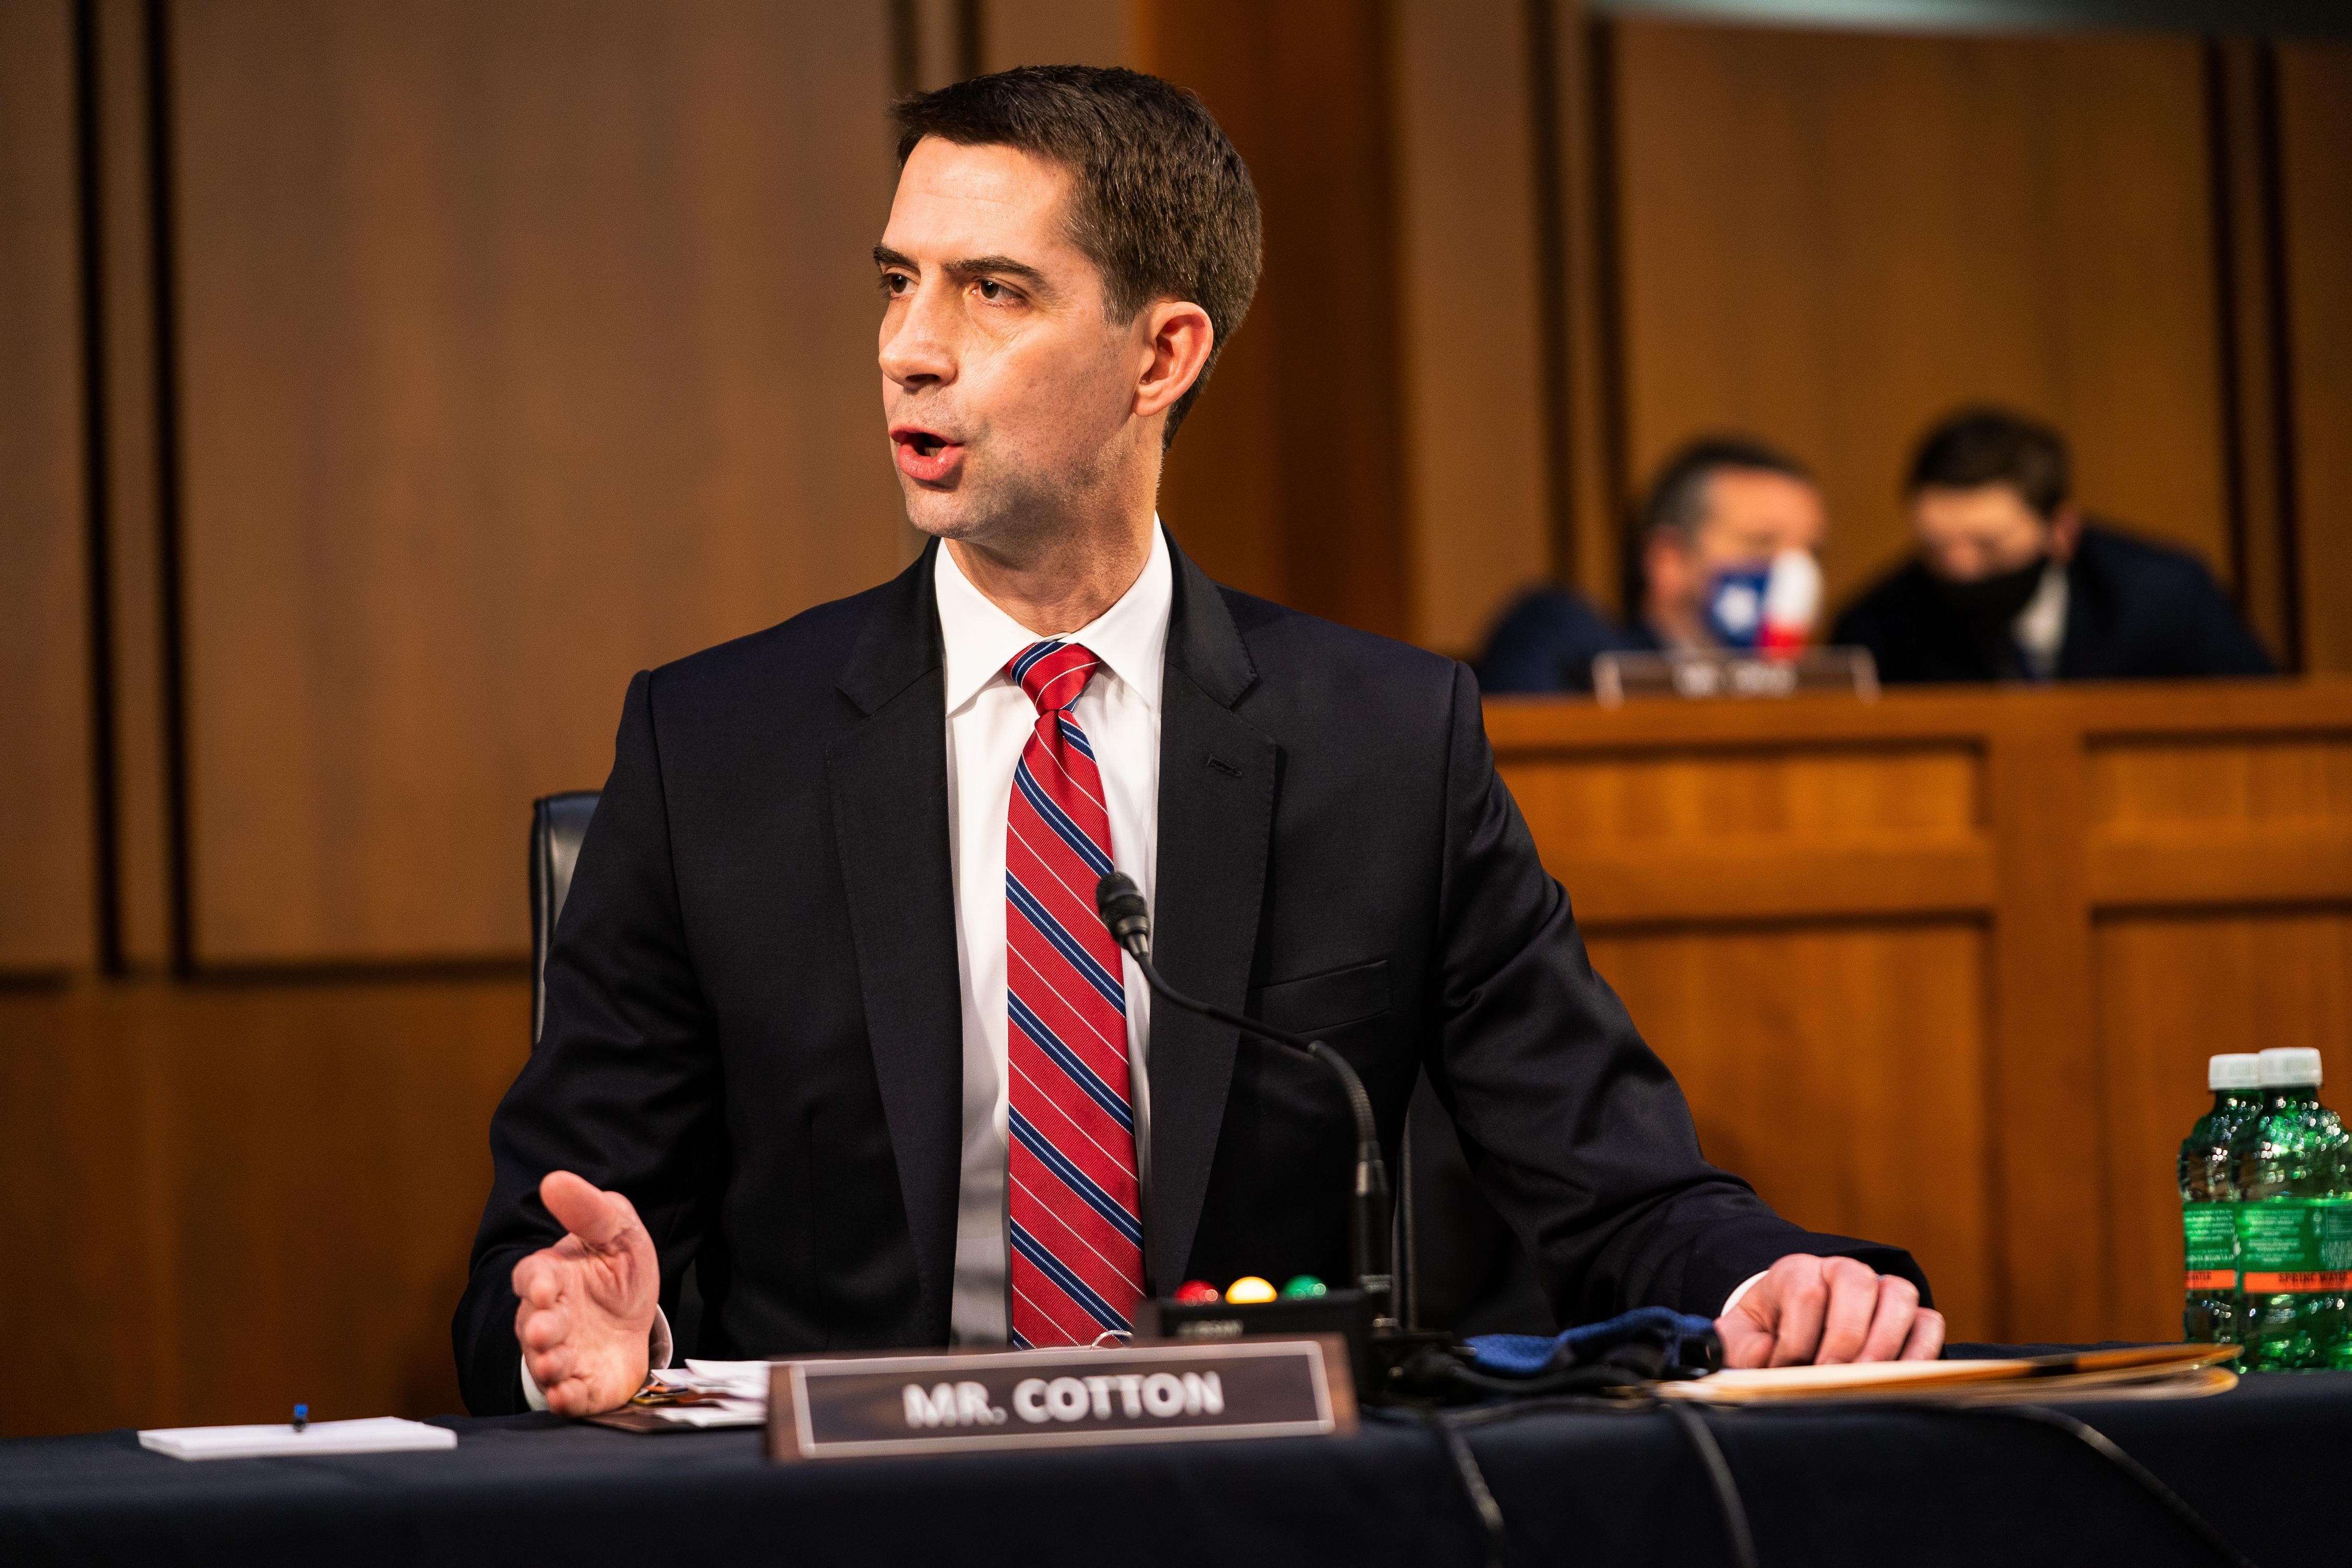 Tom Cotton speaks and gestures.